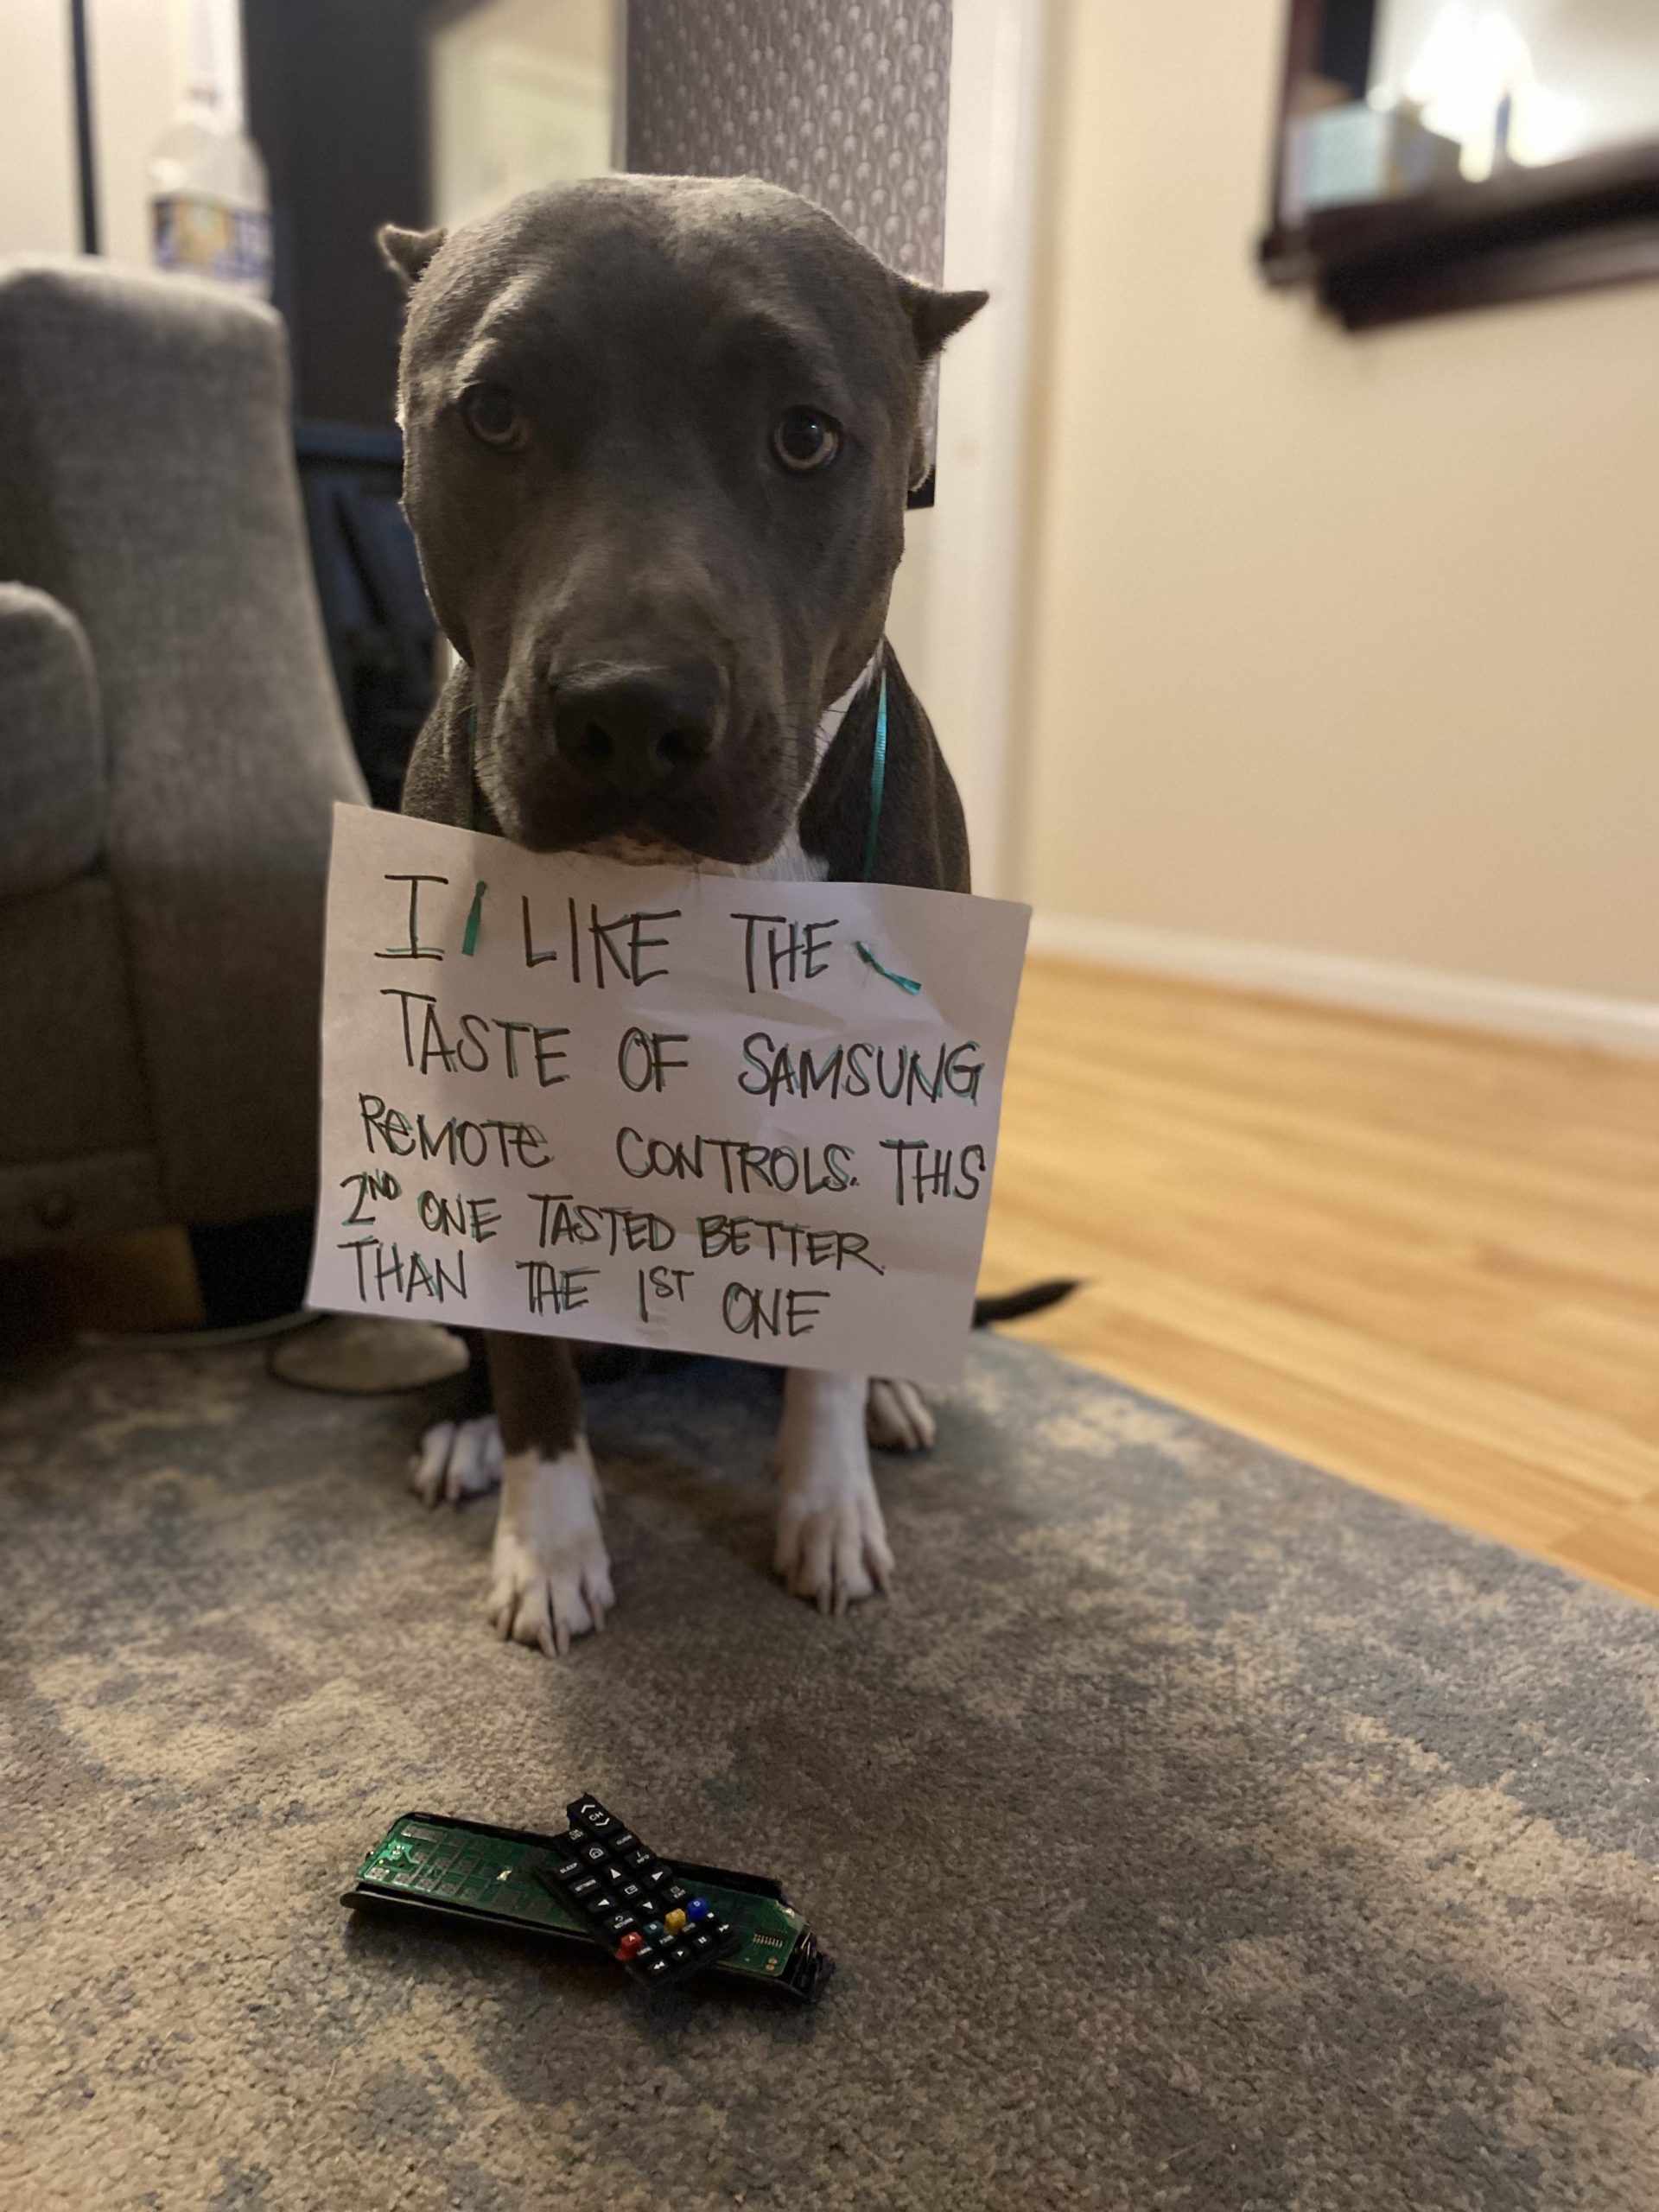 dog wearing a sign that says "I like the taste of Samsung Remote controls. The 2nd one tasted better than the 1st one."